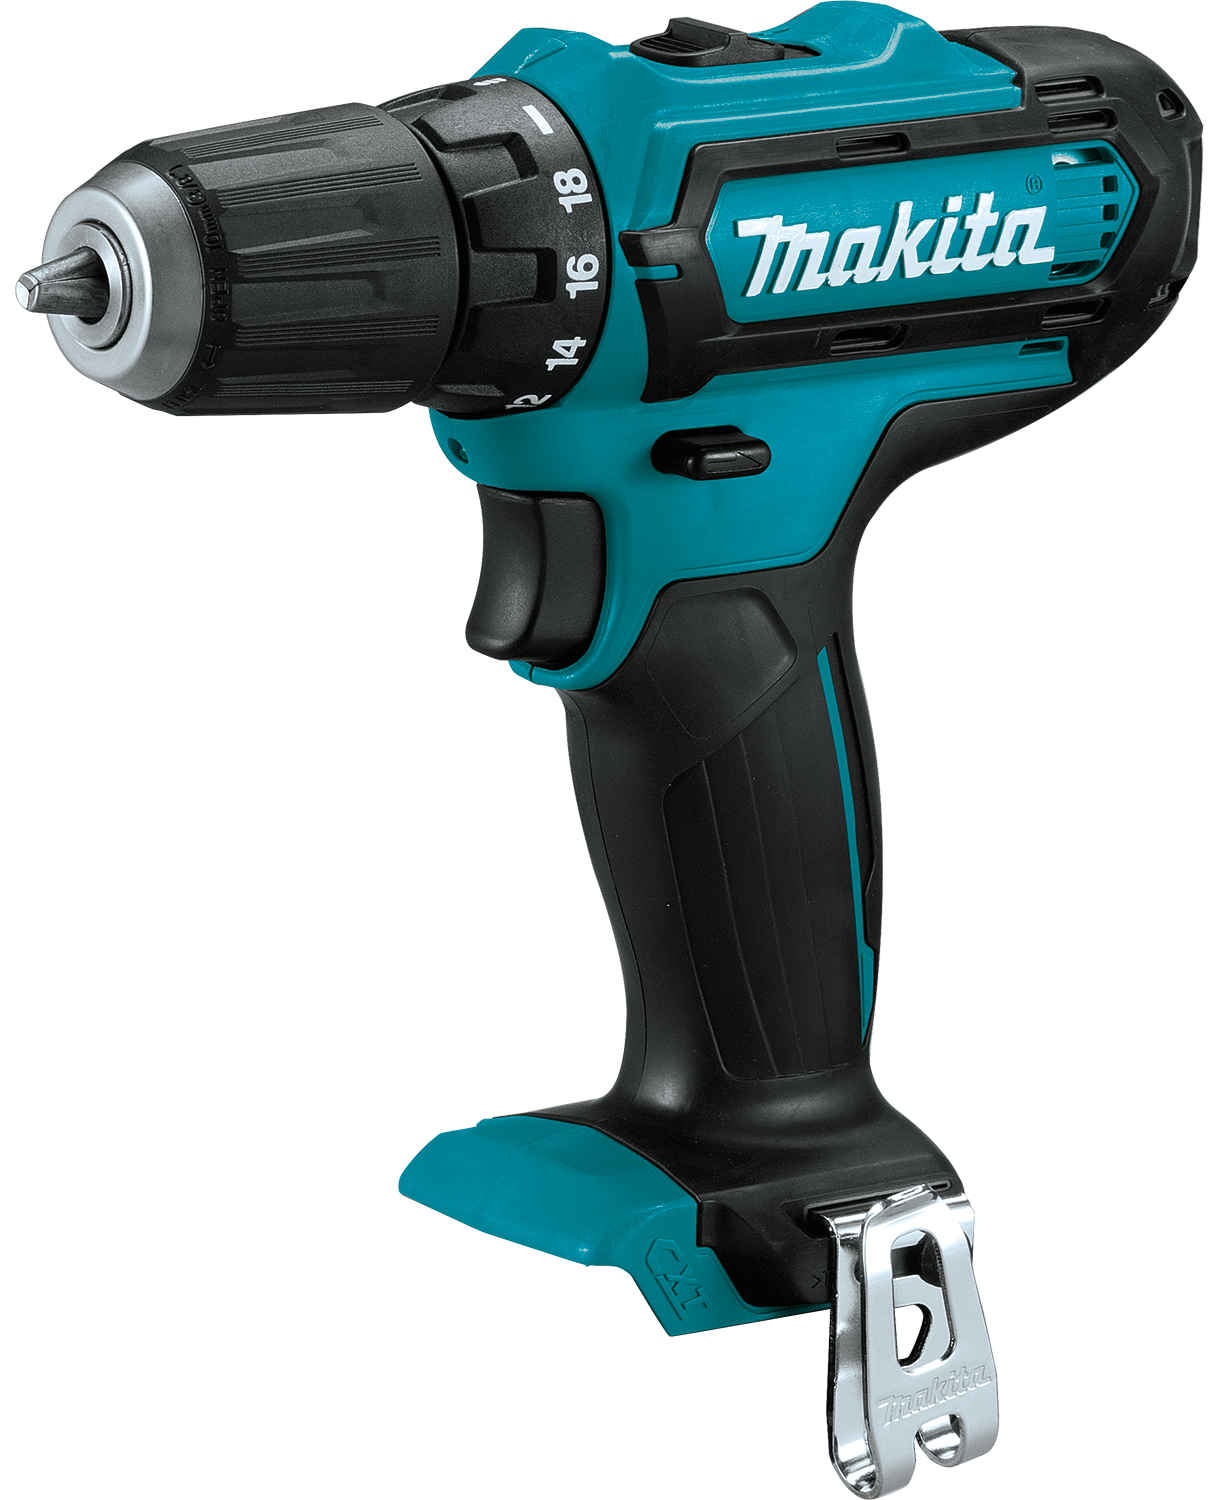 Makita 12 Volt 3/8 Inch Driver Drill Factory Serviced (Tool Only)